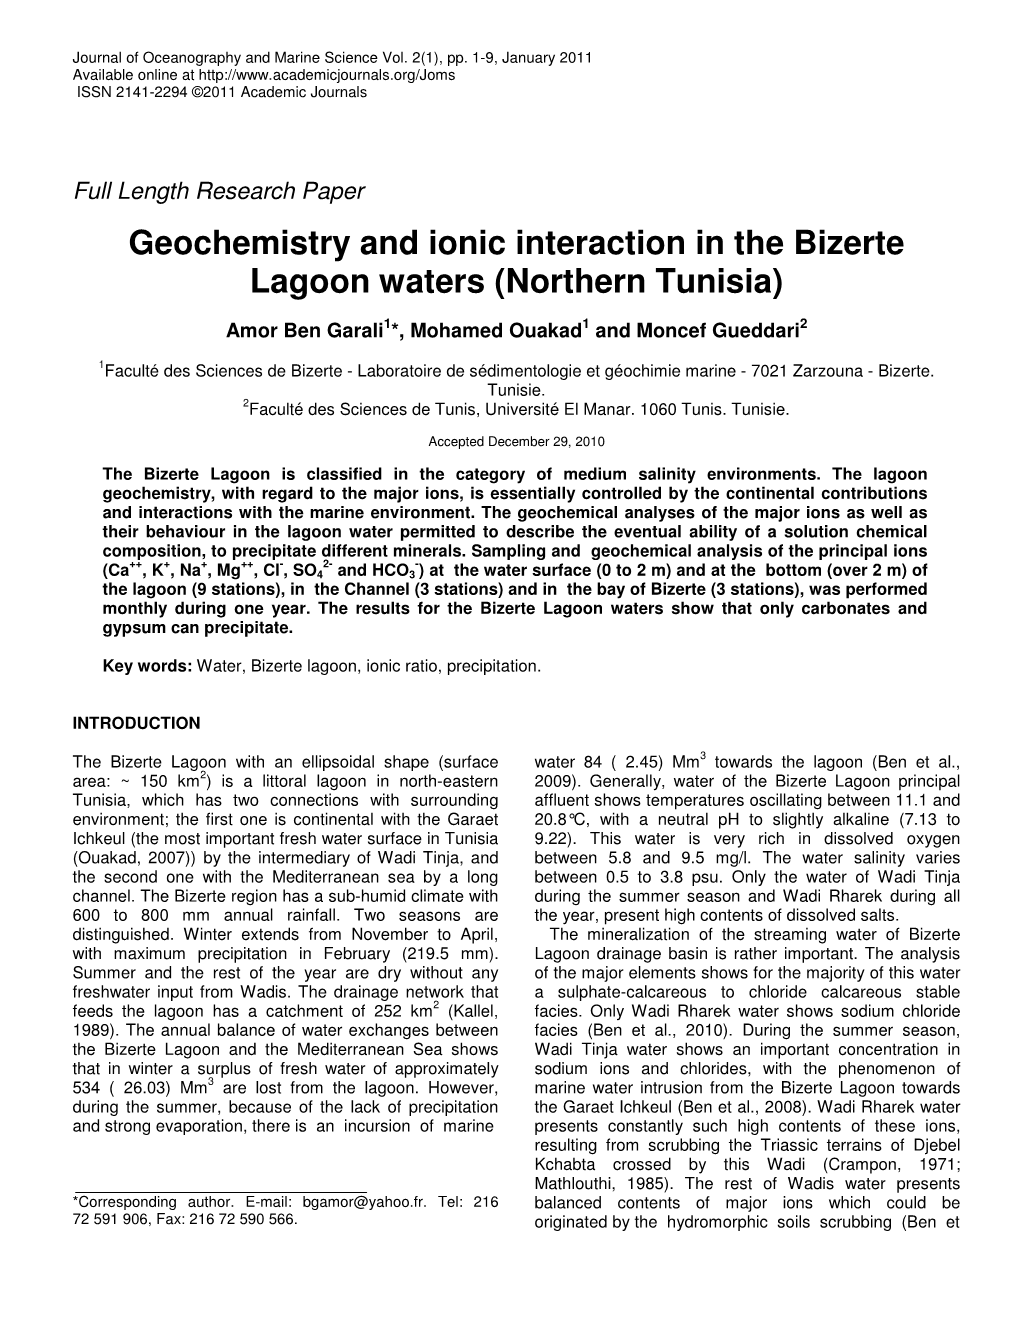 Geochemistry and Ionic Interaction in the Bizerte Lagoon Waters (Northern Tunisia)